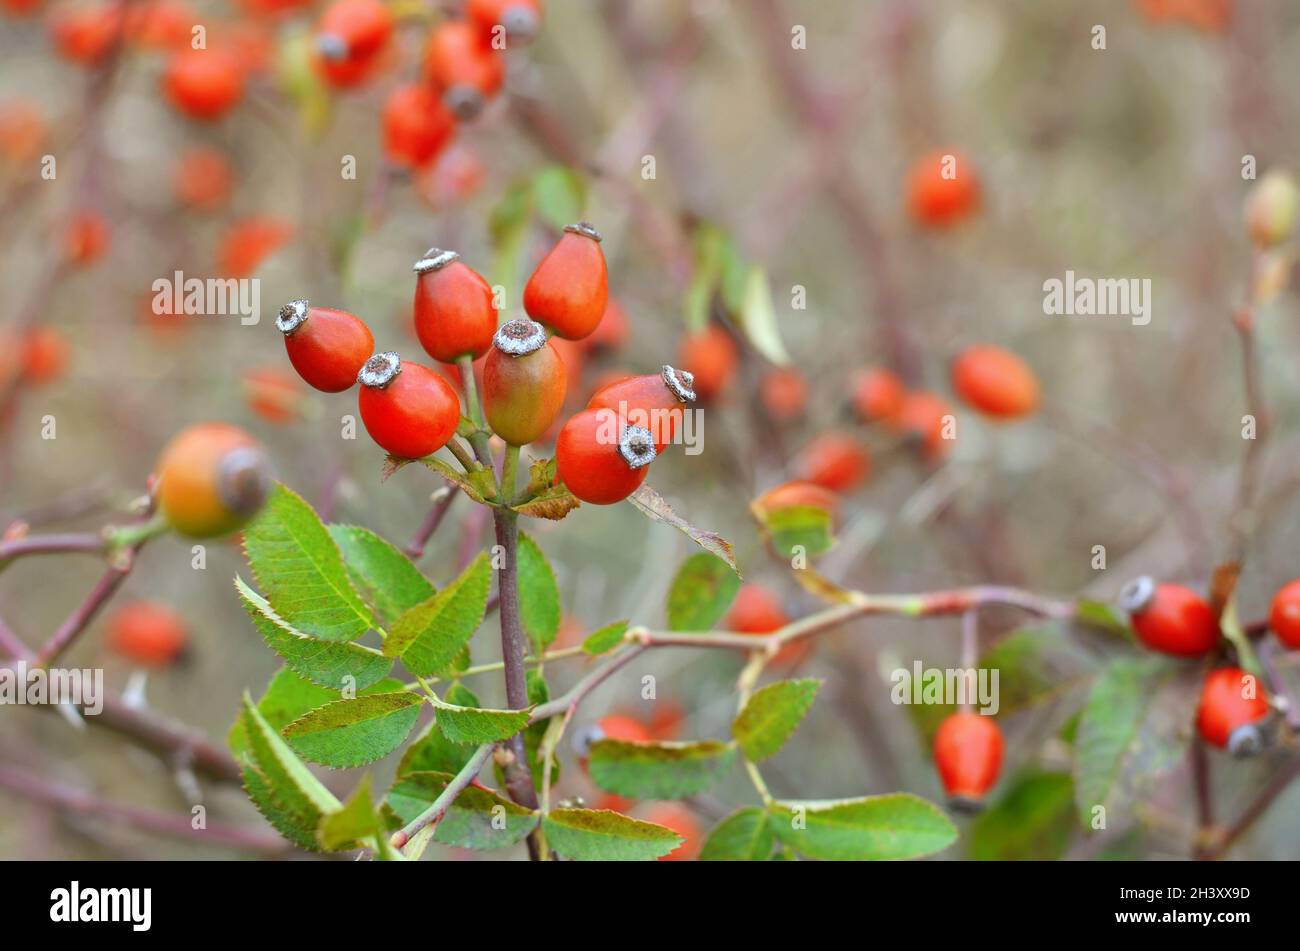 Red rose hip fruits on a bush in autumn outdoors. Wild rose hip fruits are valuable medicinal raw materials with a high content of vitamin C. Stock Photo